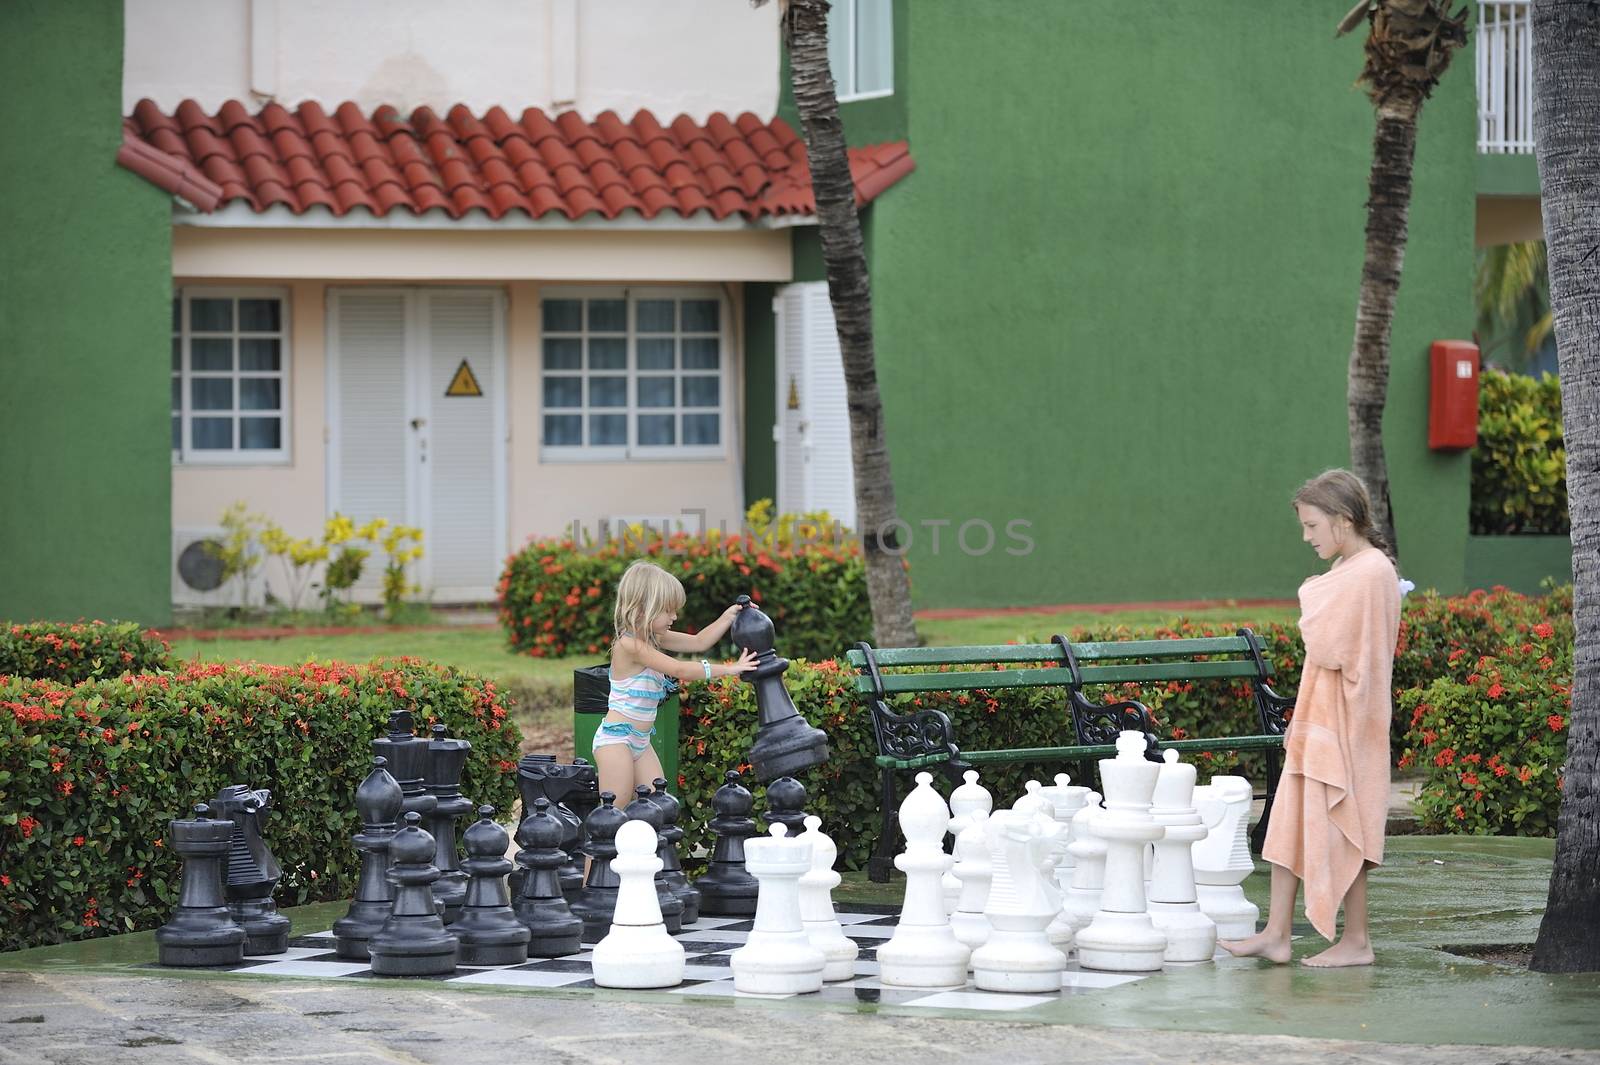 Girls in towels are playing chess with big figures.